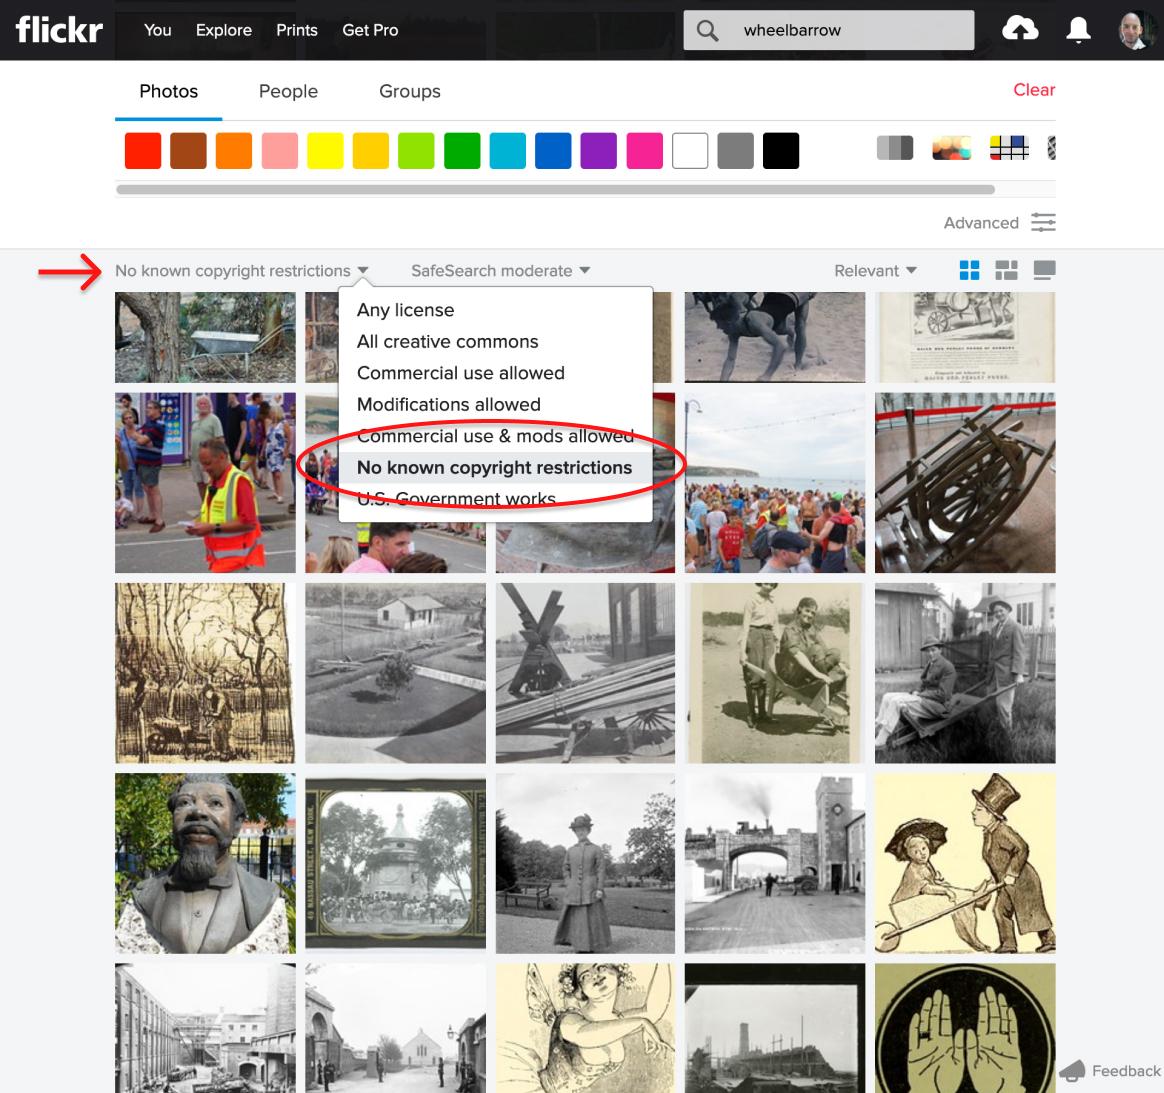 Flickr’s “no known license” search